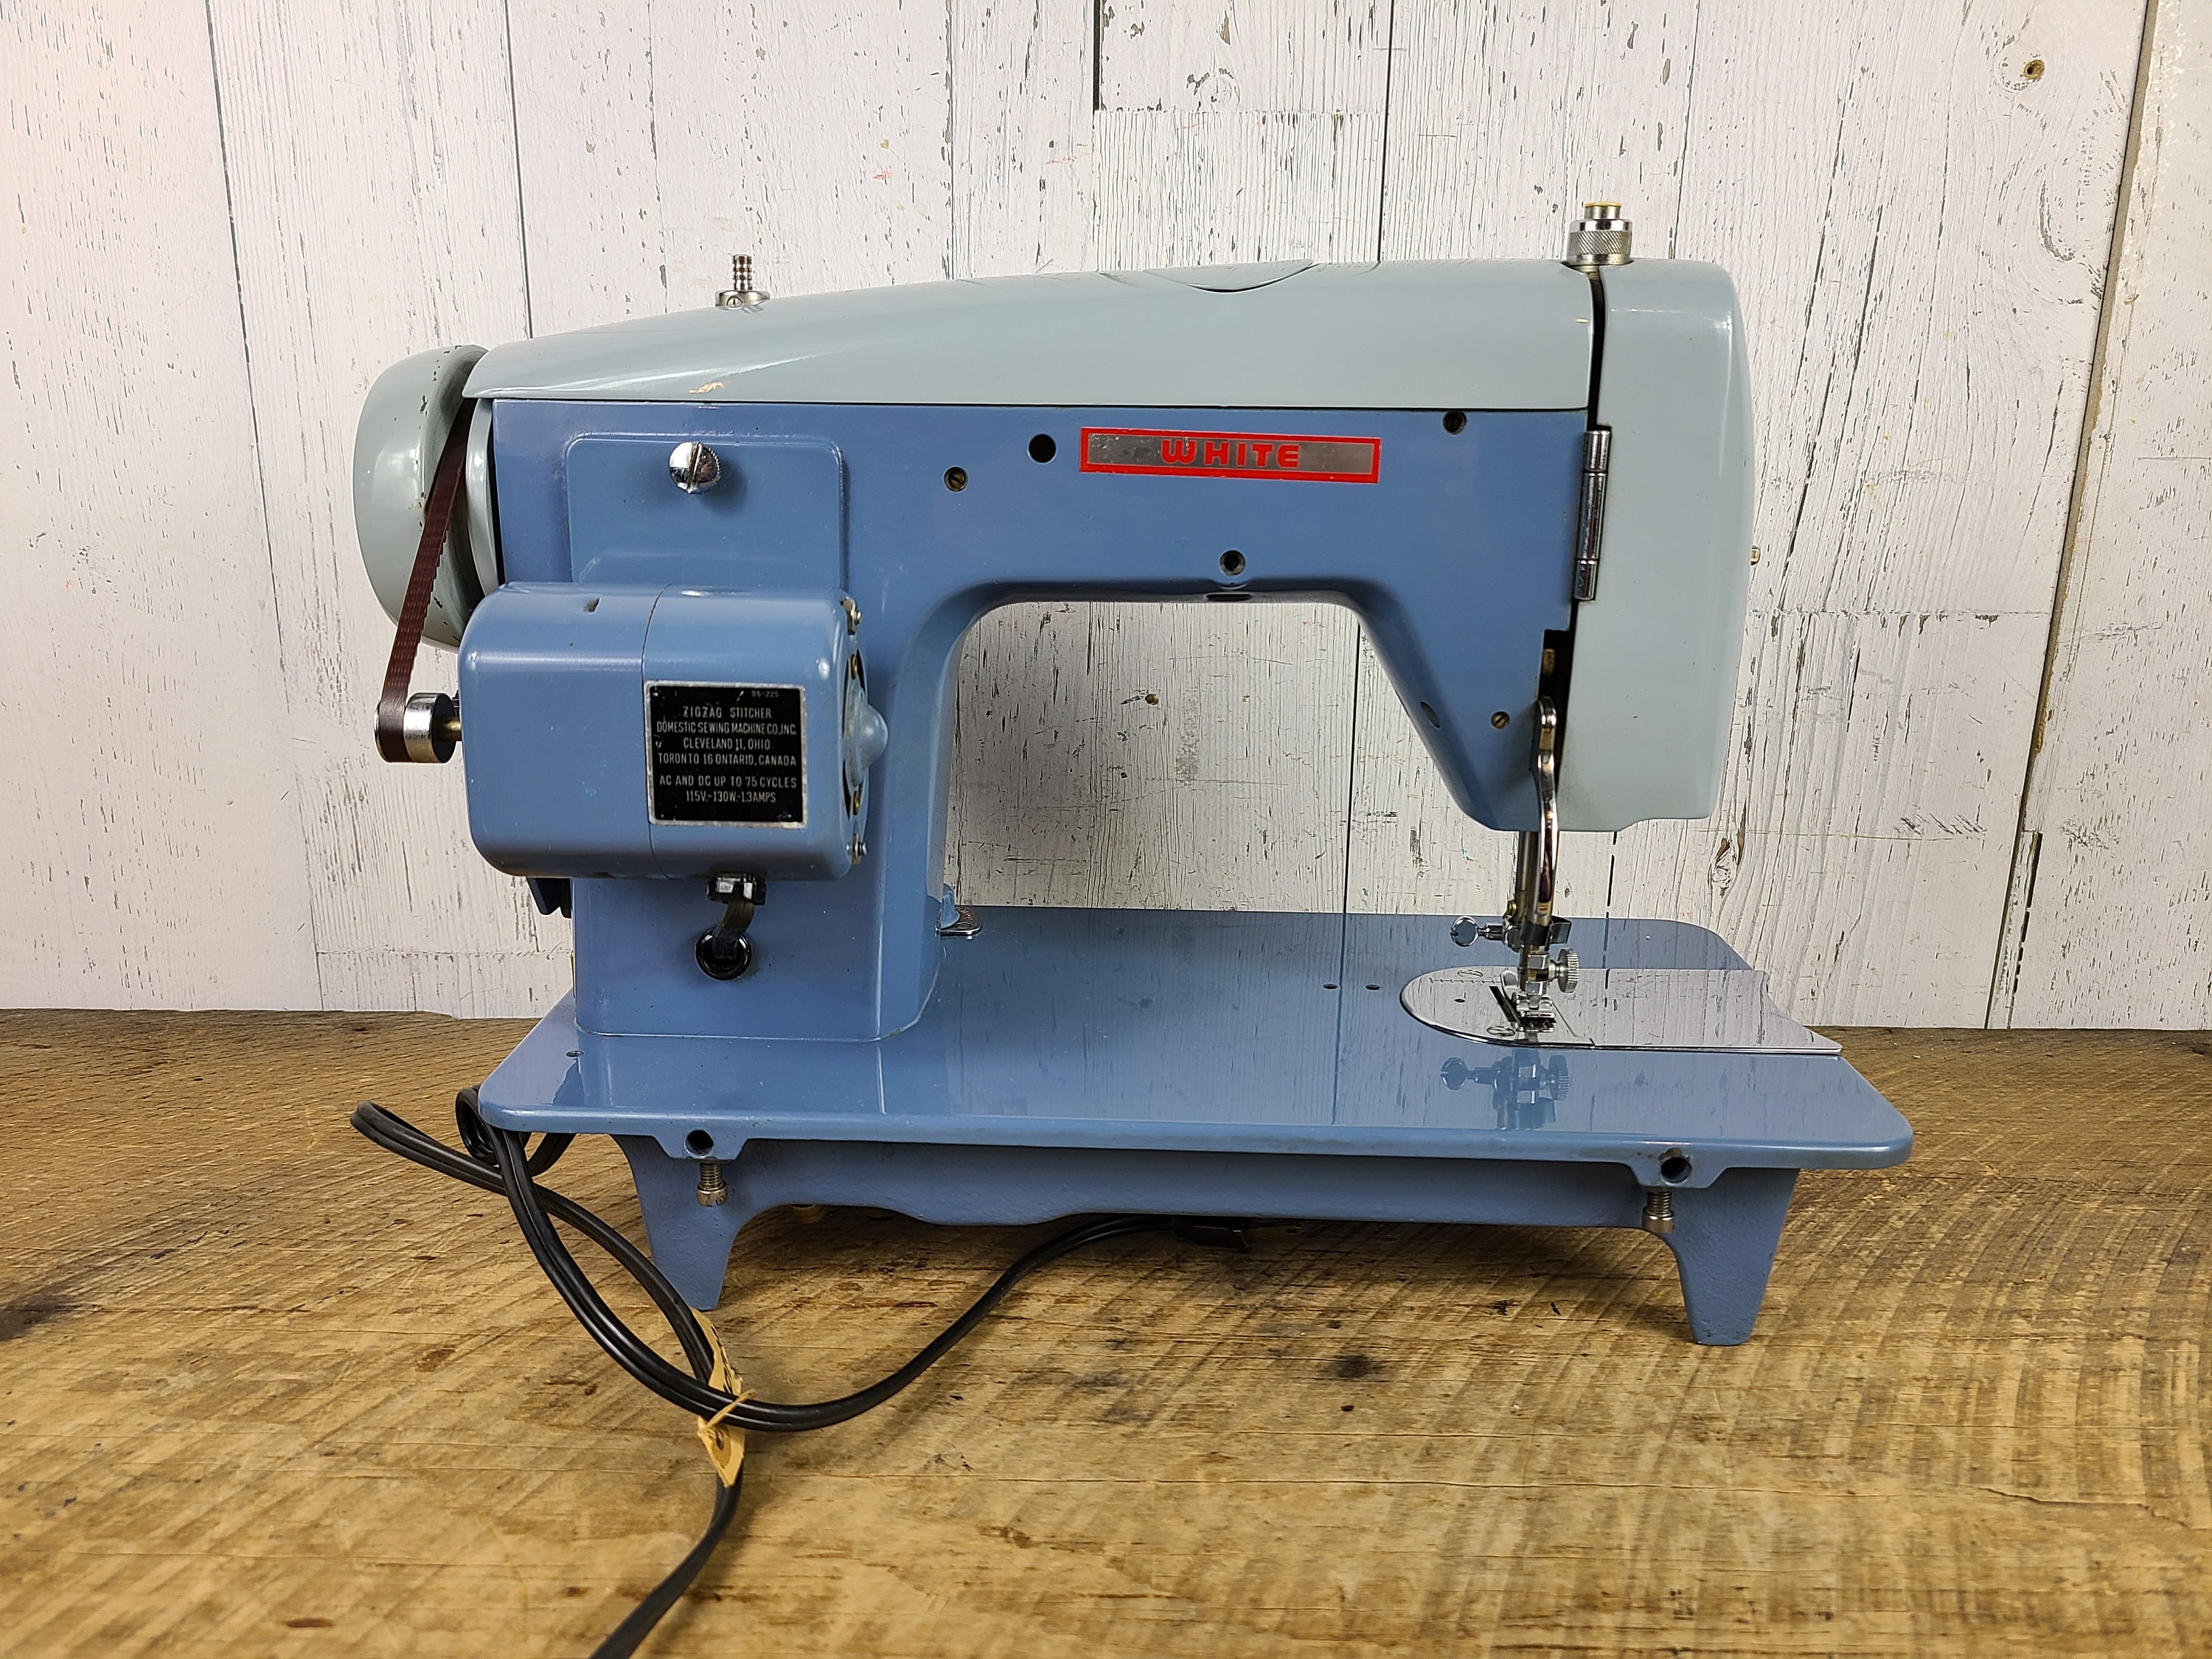 The White House - rare blue zig zag de-luxe vintage sewing machine